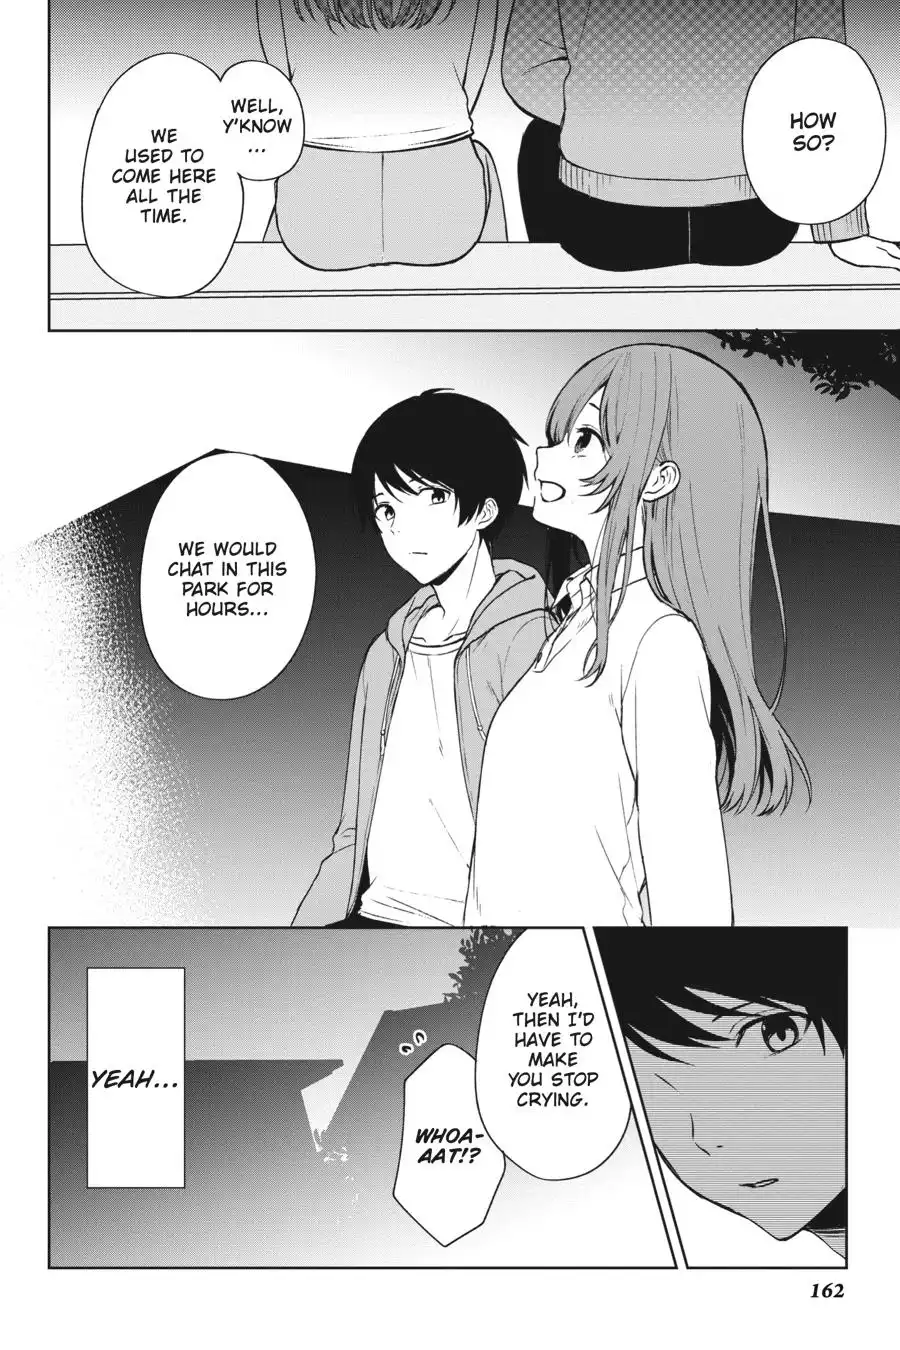 When I Rescued a Beautiful Girl Who Was About to Be Molested, It Was My Childhood Friend Sitting Next to Me Chapter 38